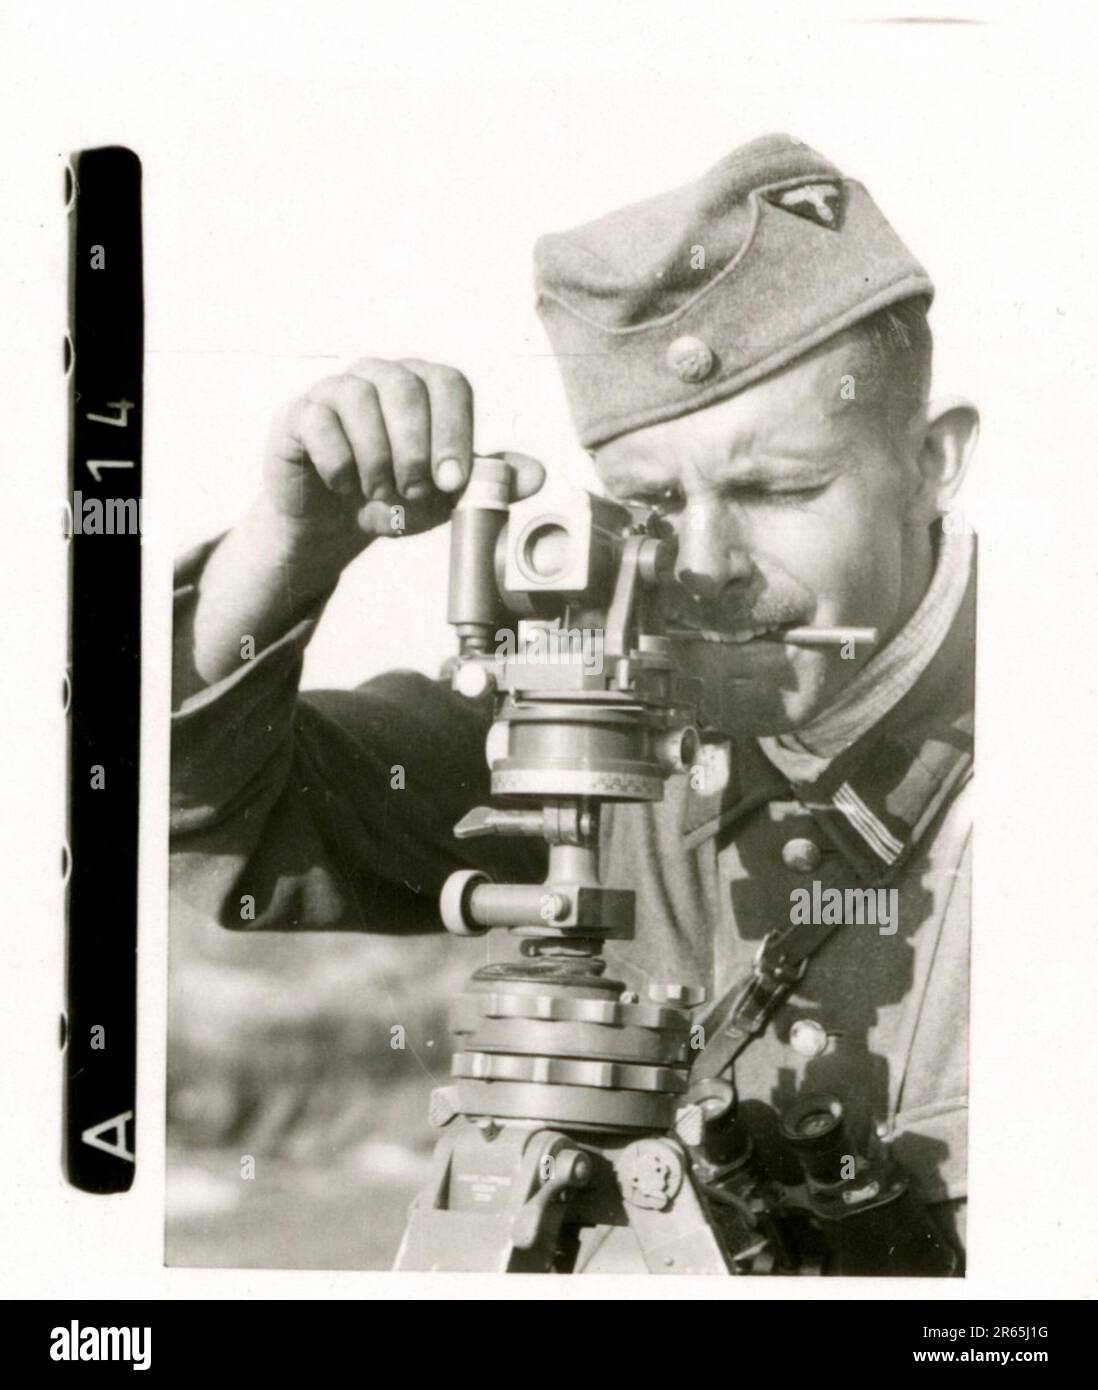 SS Photographer Baumann, Totenkopf Division, Russia 1941 Wheeled reconnaissance unit , photos of motorcycles, flak guns, graves, Russian prisoners of war and villagers, Fieseler Fi 156 Storch, destroyed Russian tanks and equipment, bridge building, soldiers swimming in river, machine gun crew, anti-tank gun crew, unit awards ceremony, units on the march, artillery towed by halftracks, motor vehicle maintenance unit, Kriegsberichter activities, field bakery, field hospital, air resupply by JU-52, antiaircraft searchlight unit, field post office, and a  Focke-Wulf 189 (Eagle-Owl) in flight.  Ima Stock Photo